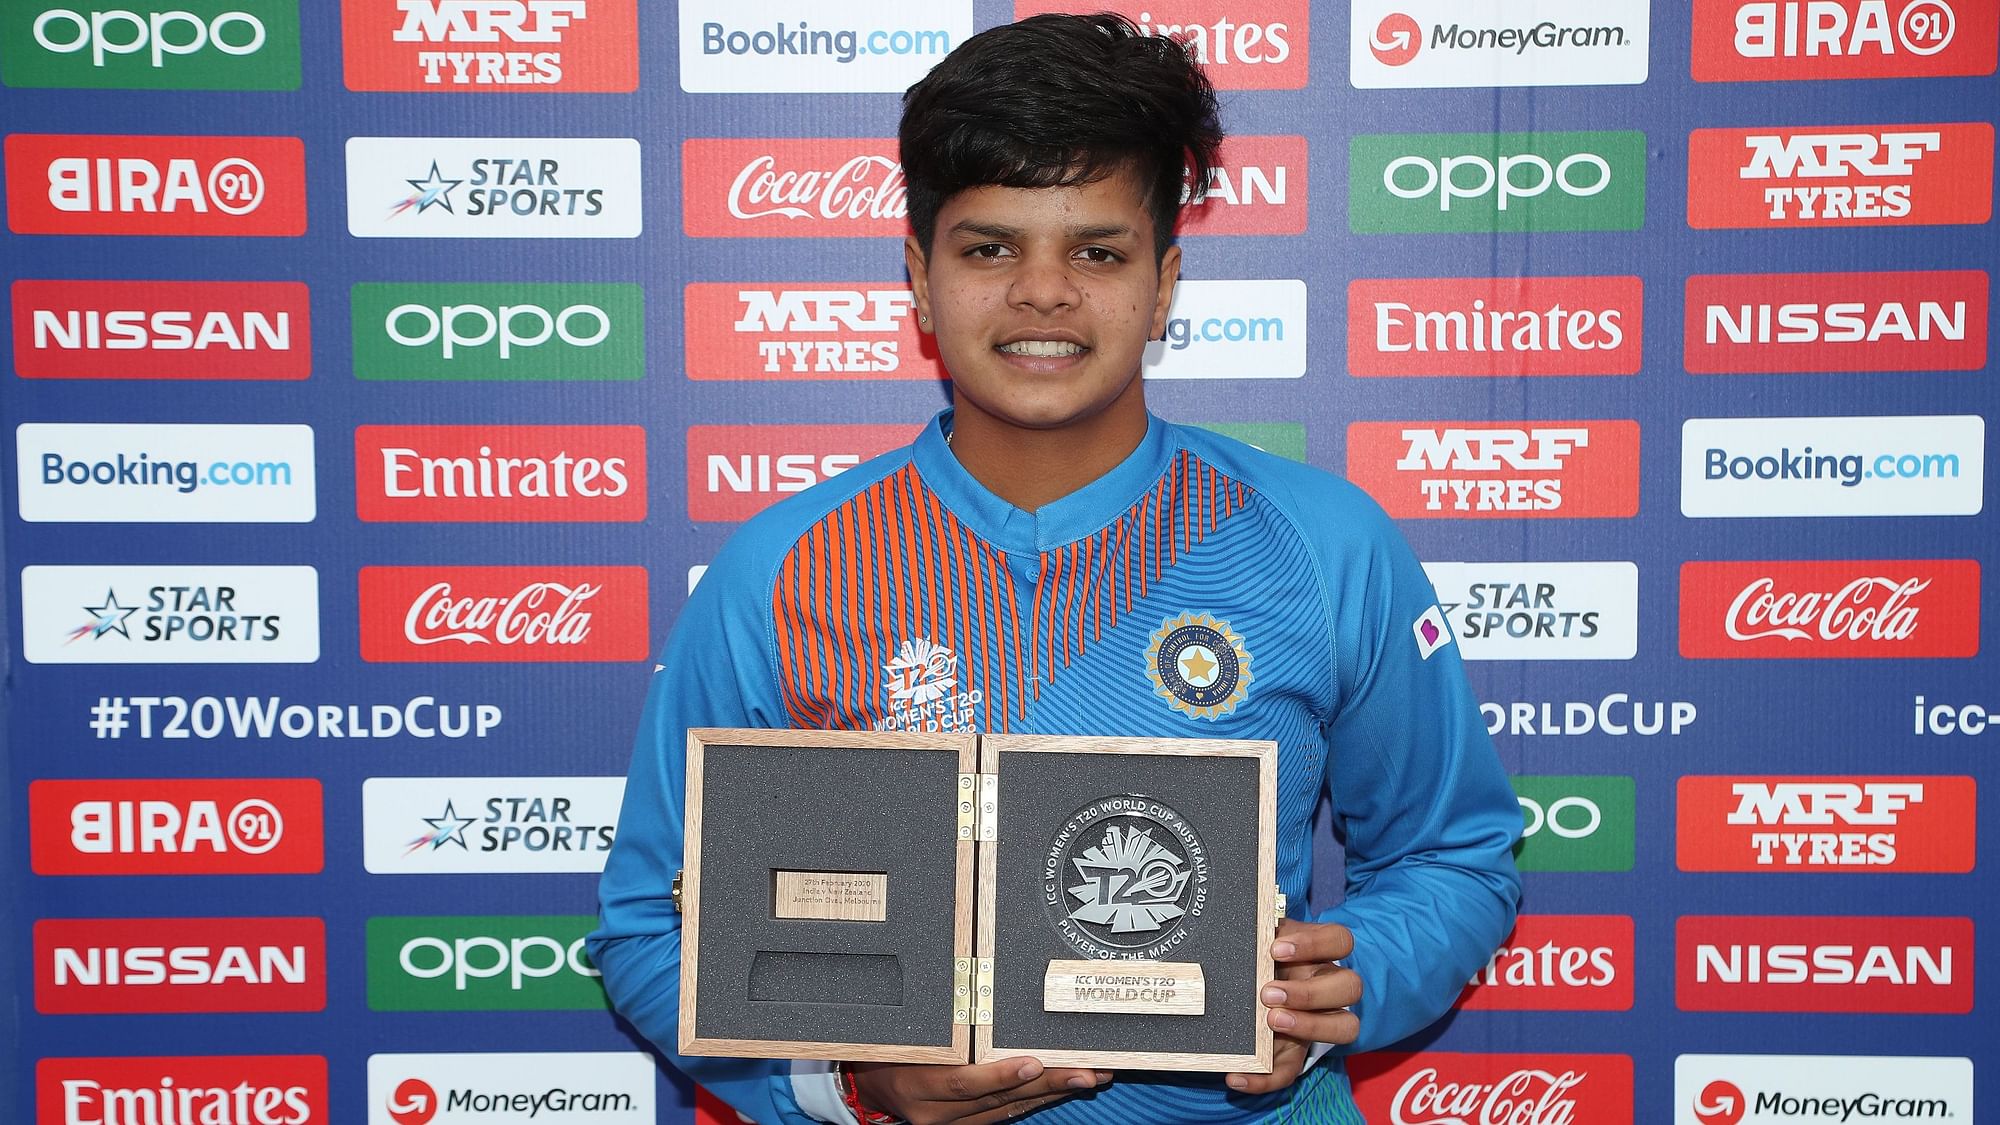 16-year-old Shafali Verma has been India’s big star at the ongoing Women’s T20 World Cup.